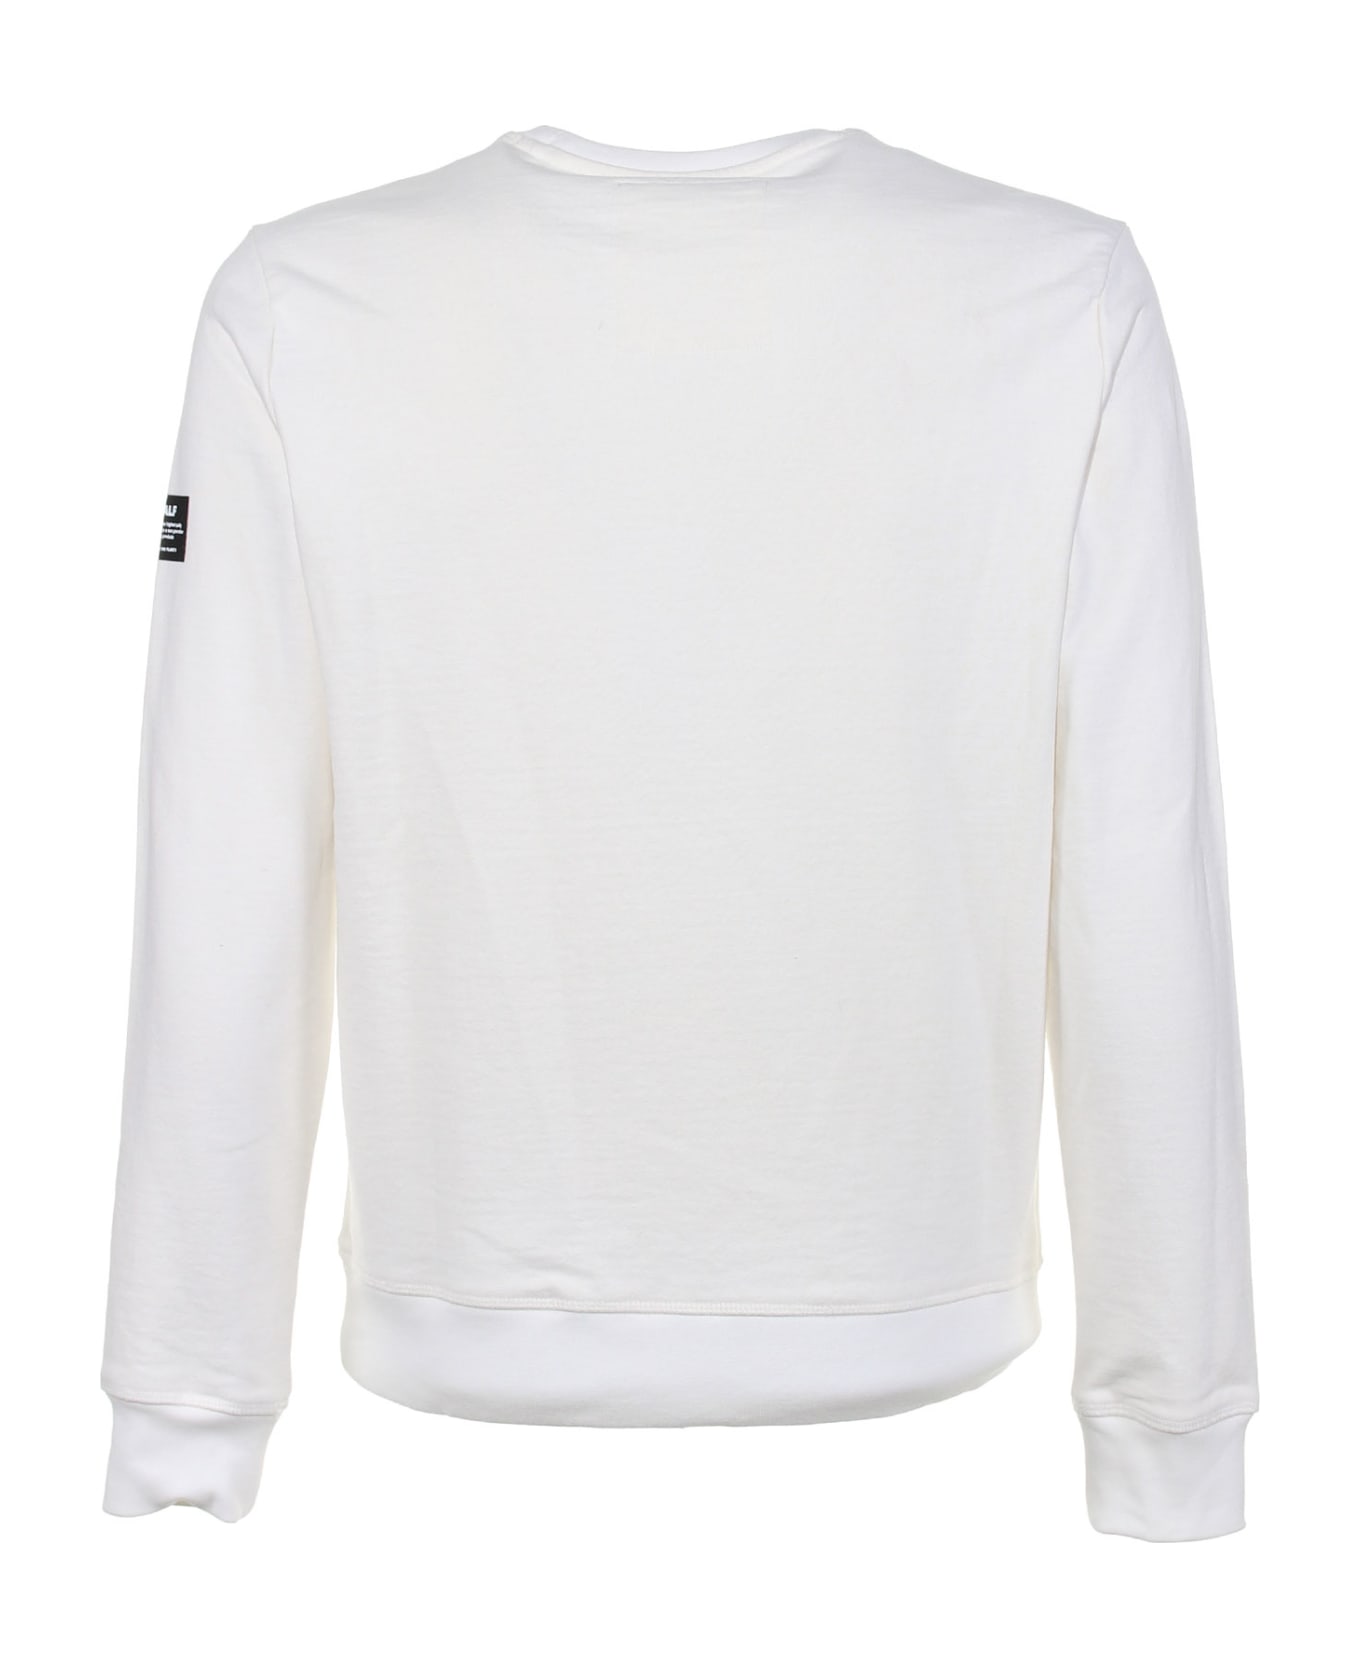 Ecoalf Sweatshirt With Contrasting Details - OFF WHITE